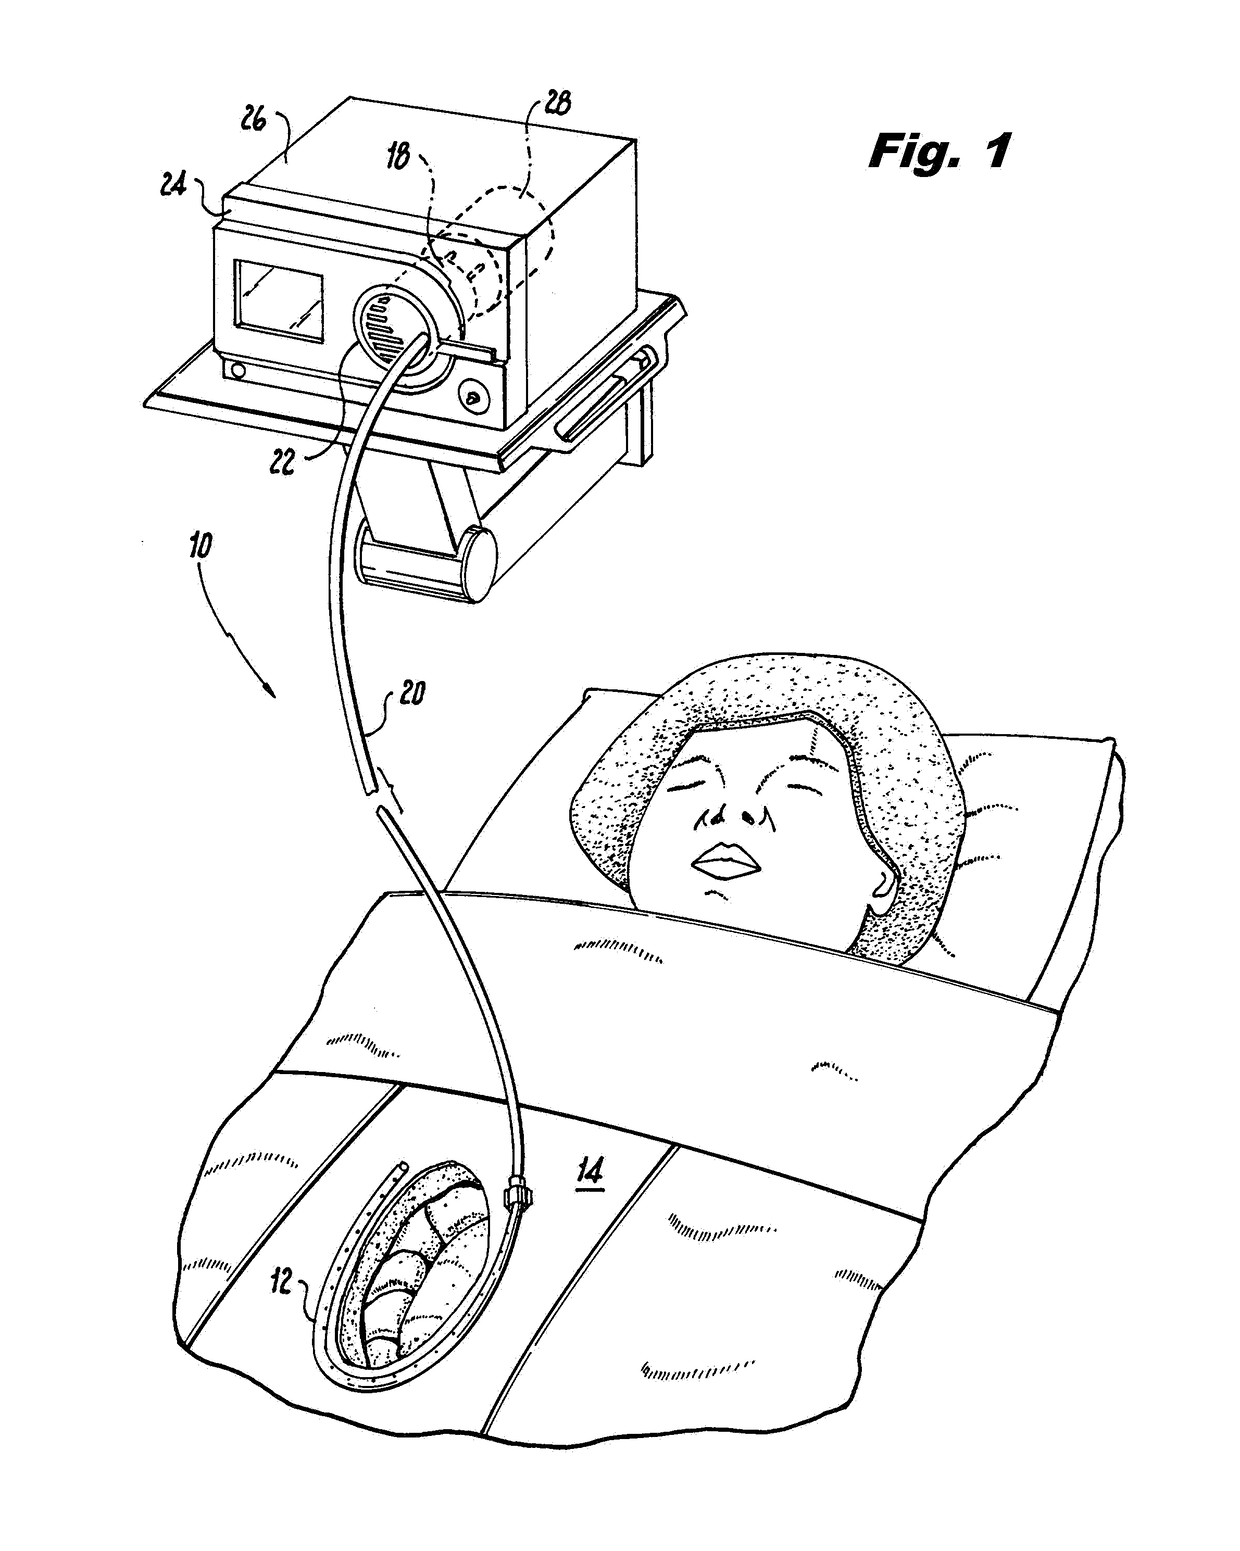 Smoke evacuation system for invasive surgical procedures